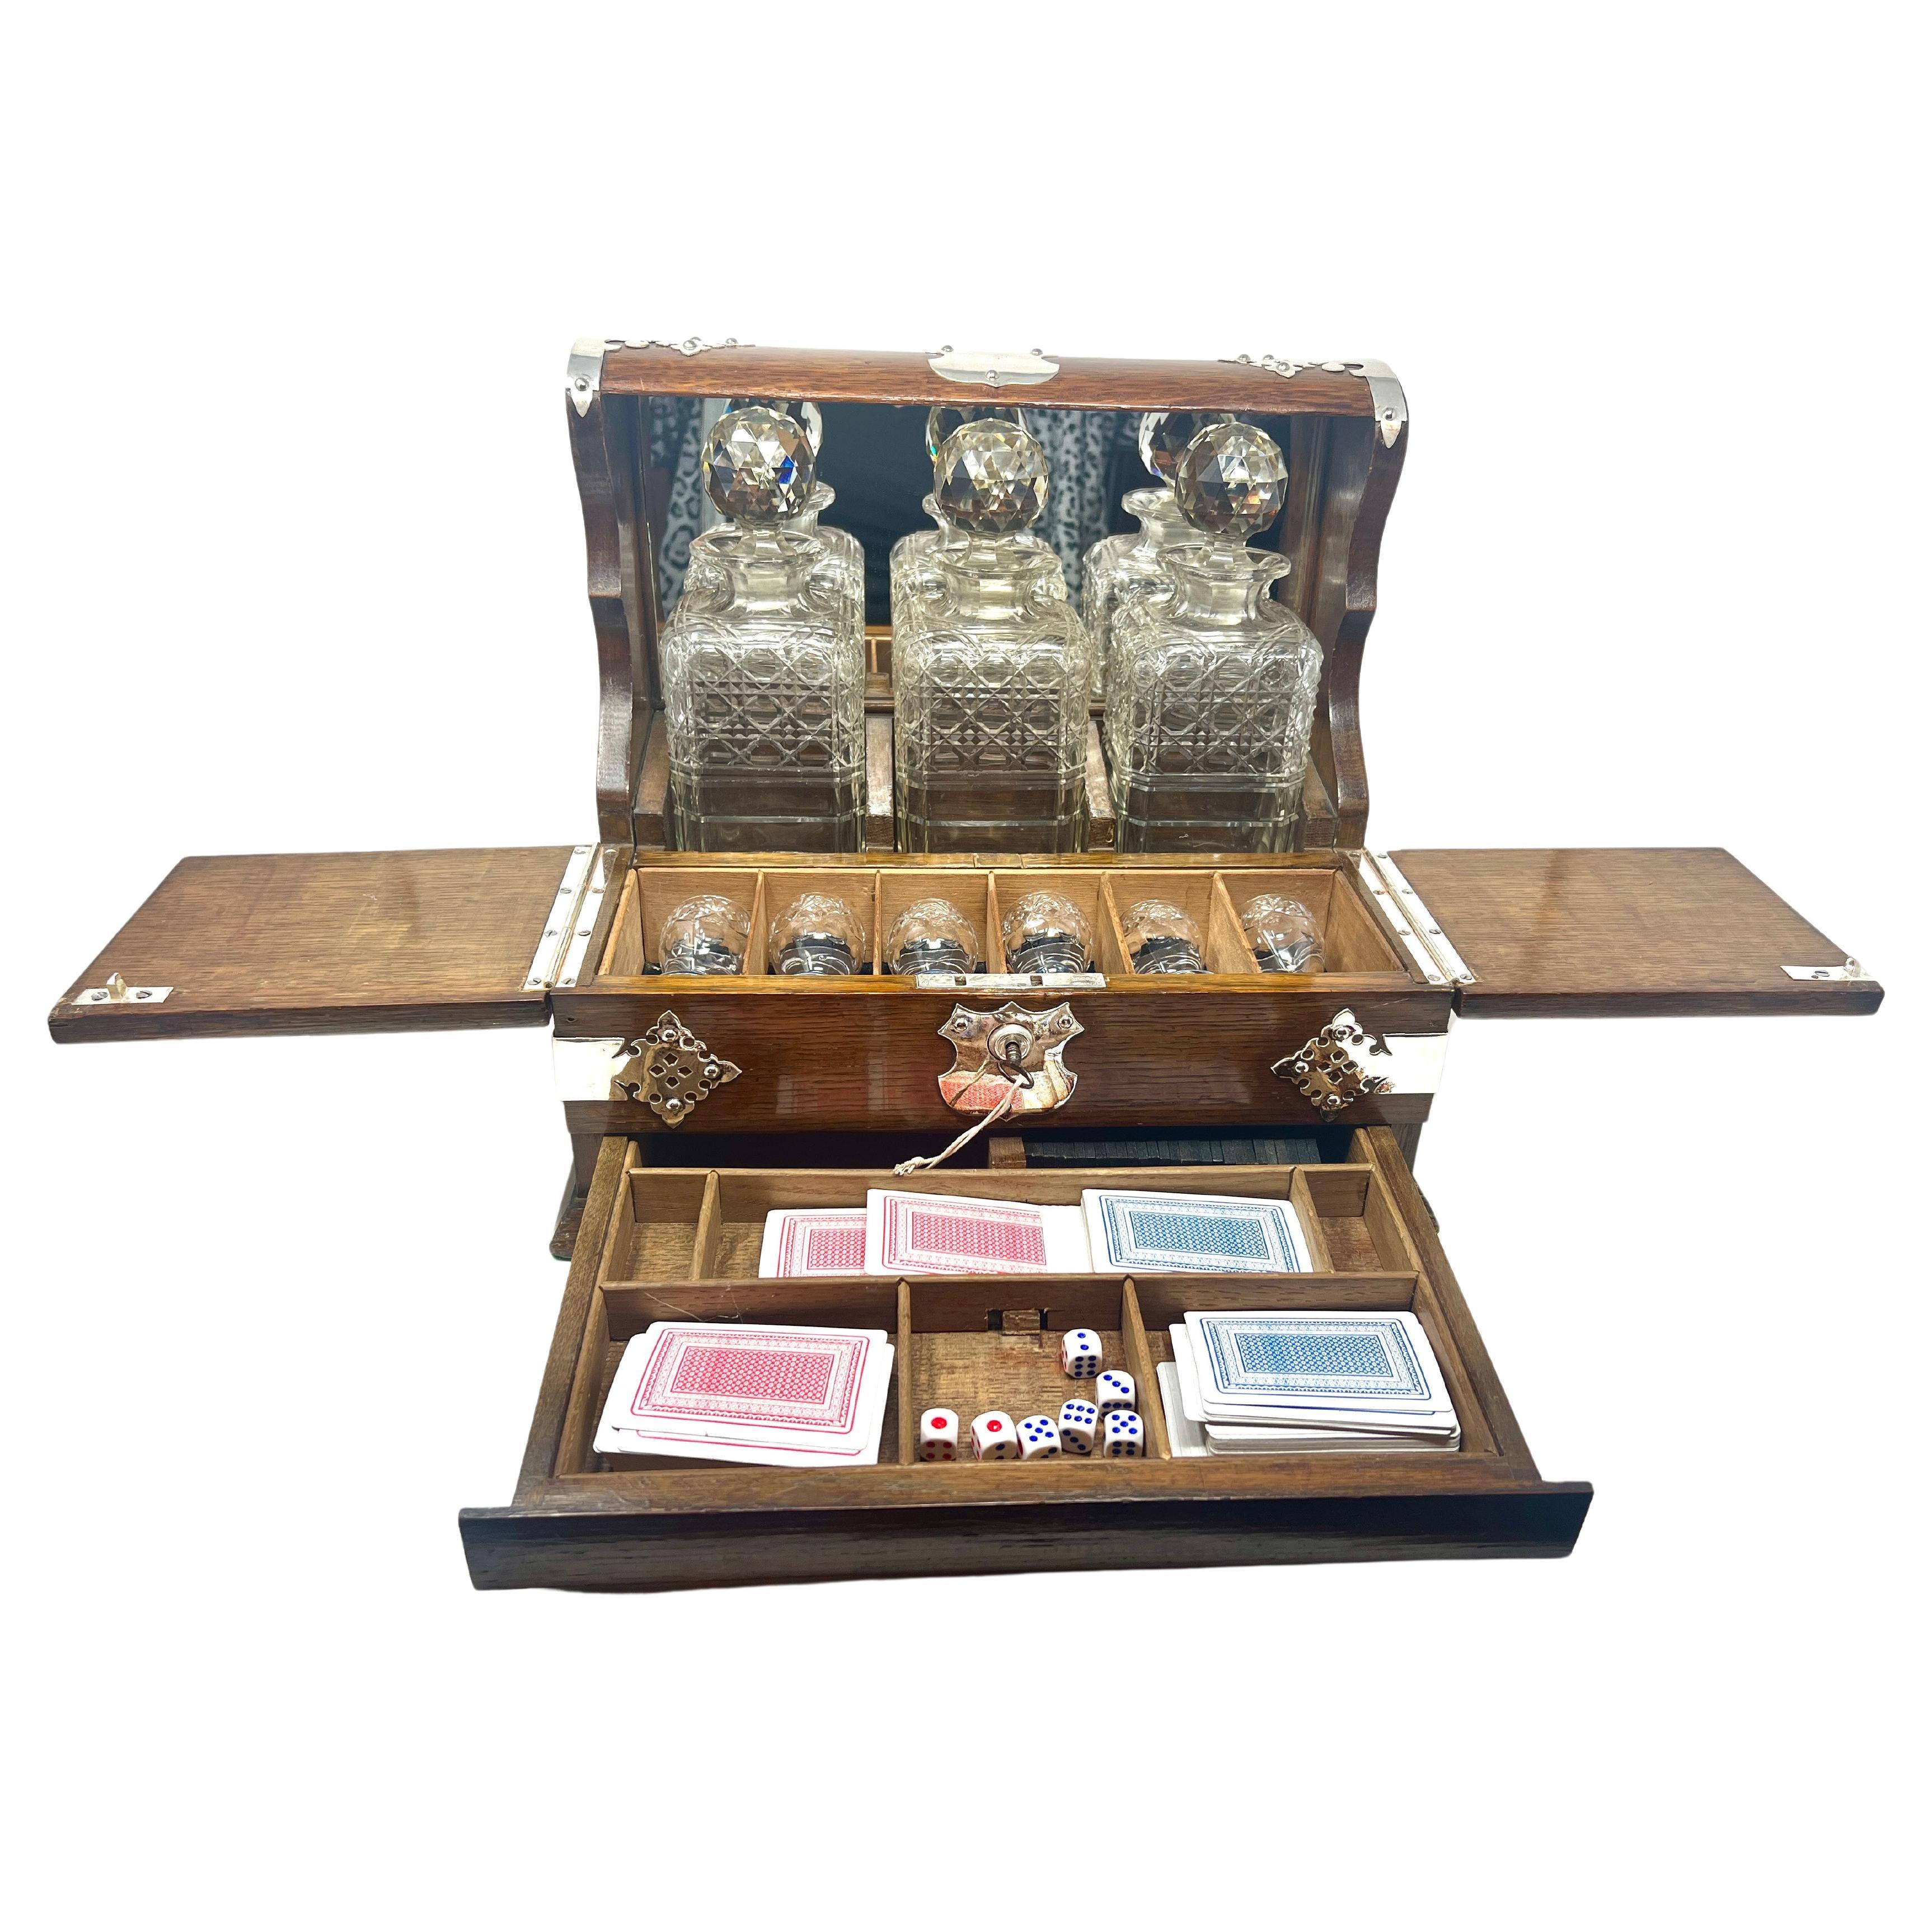 Antique English Sheffield Silver Mounted Golden Oak and Cut Crystal Games Box Tantalus with Fitted Interior and Mirrored Back, Circa 1890's.
Fitted Interior Includes 3 Crystal Decanters, 6 Crystal Cordials, Playing Cards & Dice.